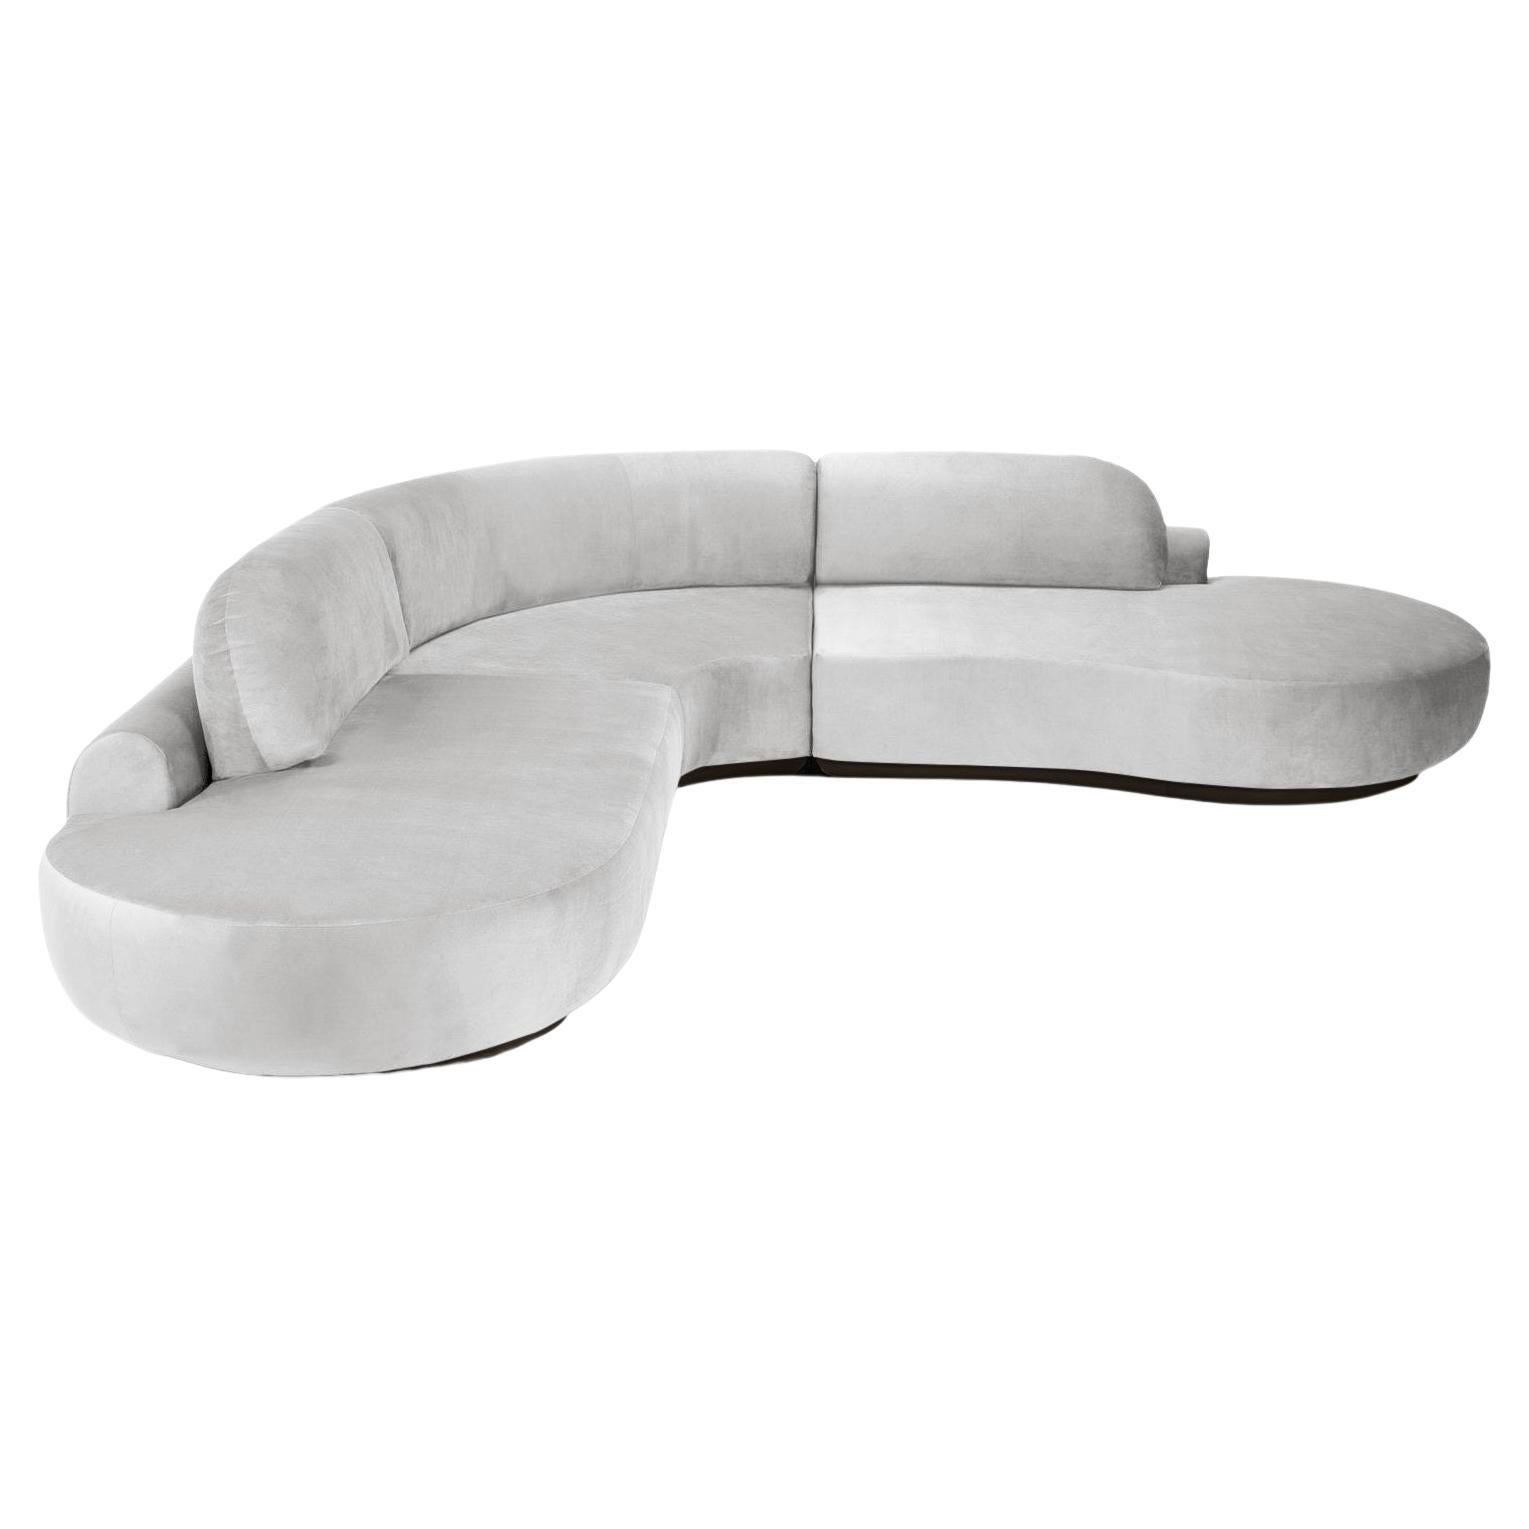 Naked Curved Sectional Sofa, 3 Piece with Beech Ash-056-5 and Aluminium